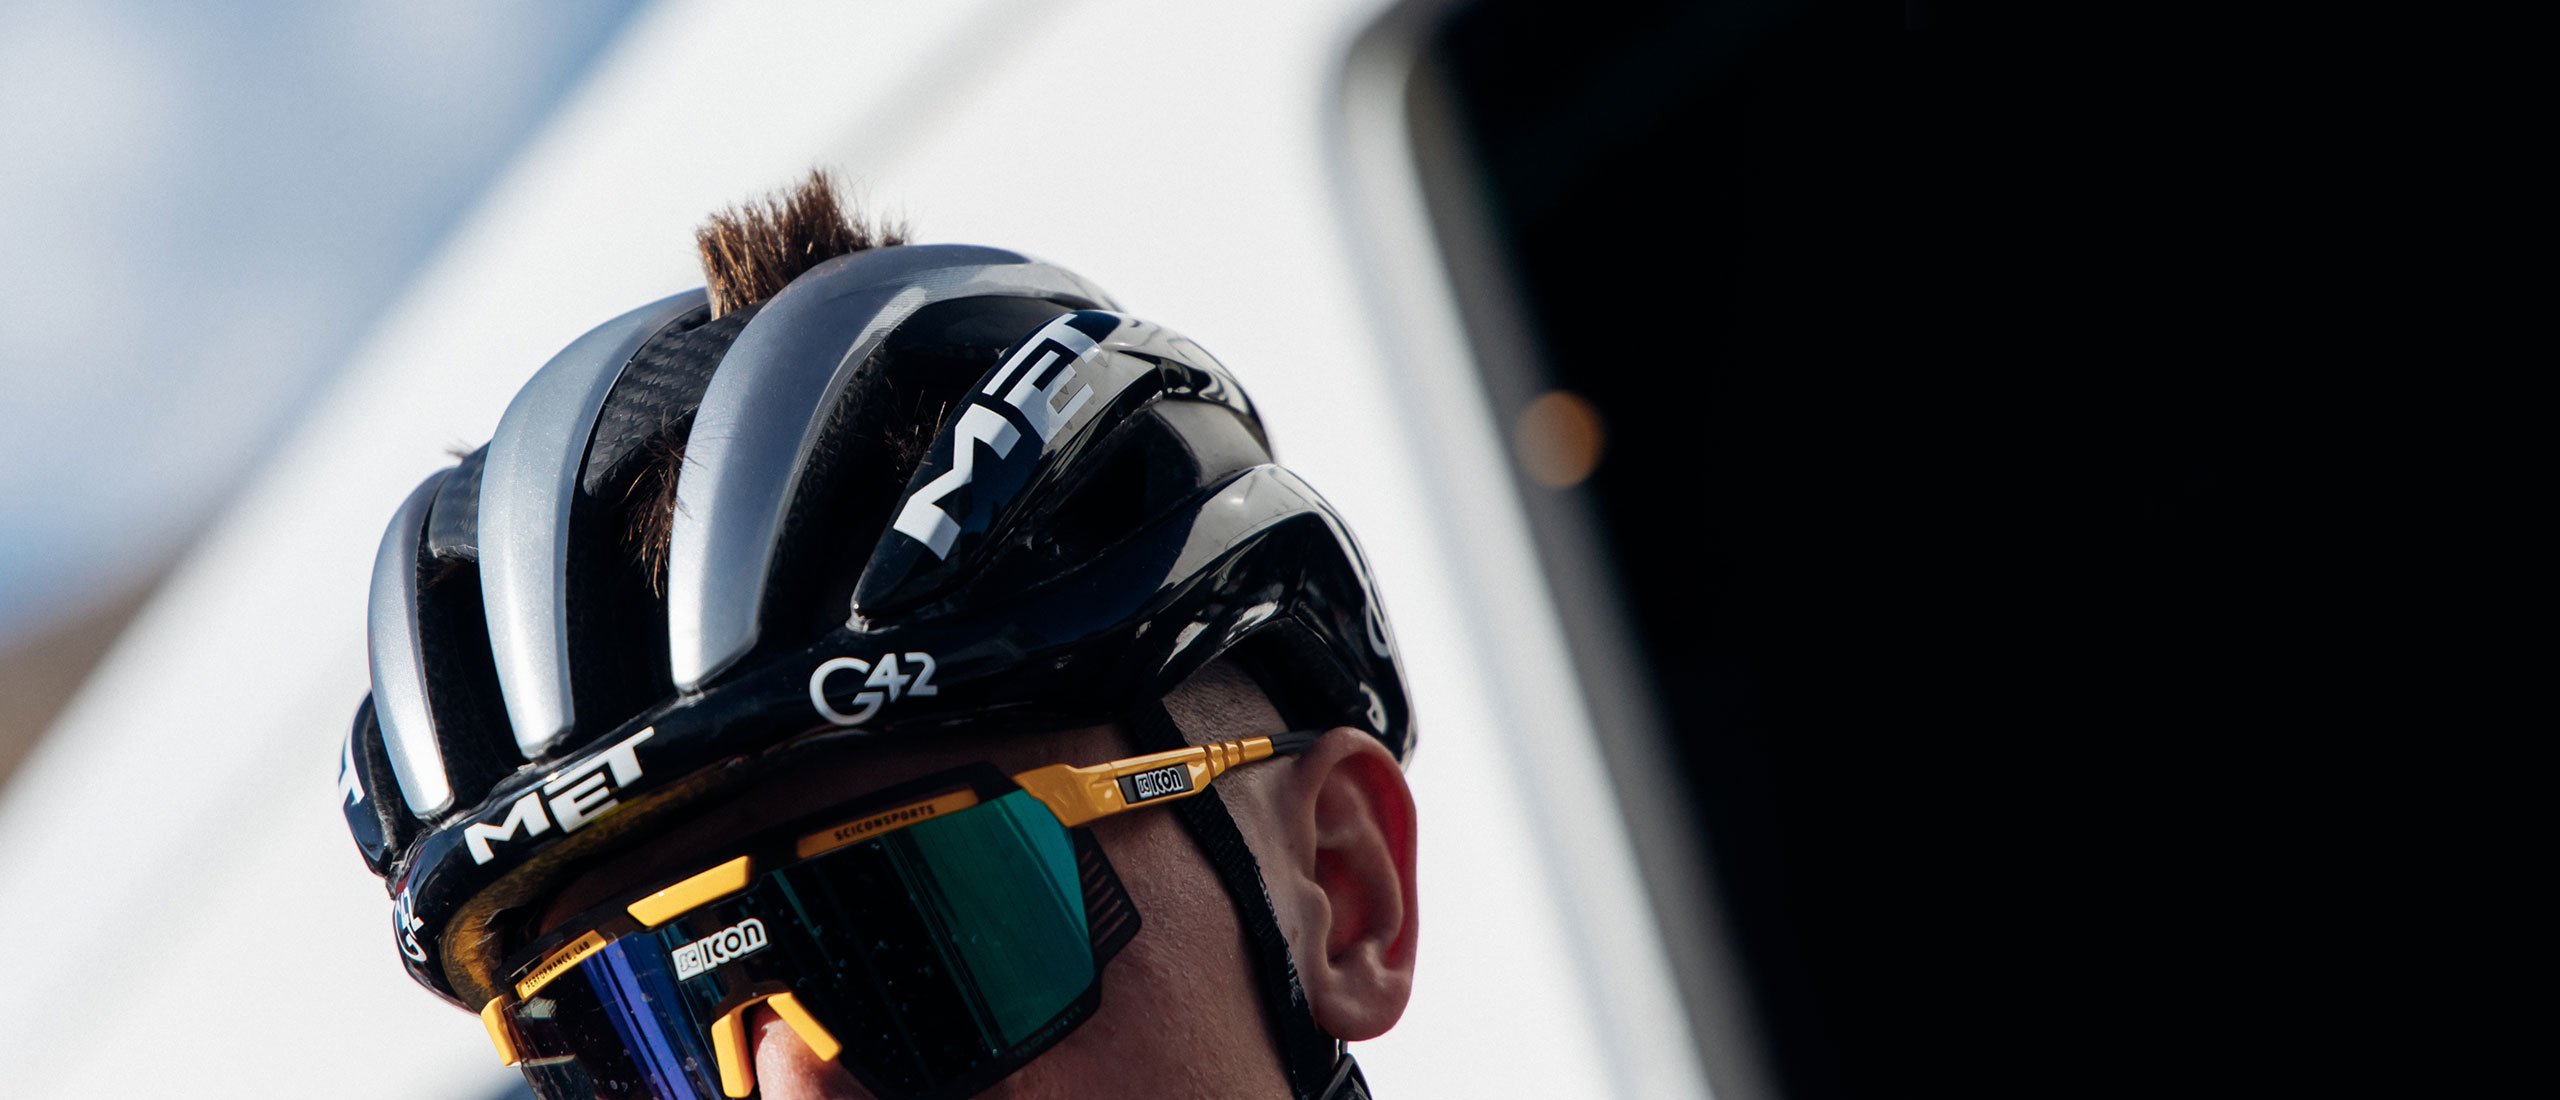 MET Trenta 3K Carbon Mips is a Road, Aero, Cyclocross and Gravel Helmet. Used by Tadej Pogačar and UAE Team Emirates in 2023 Road UCI World Tour season.